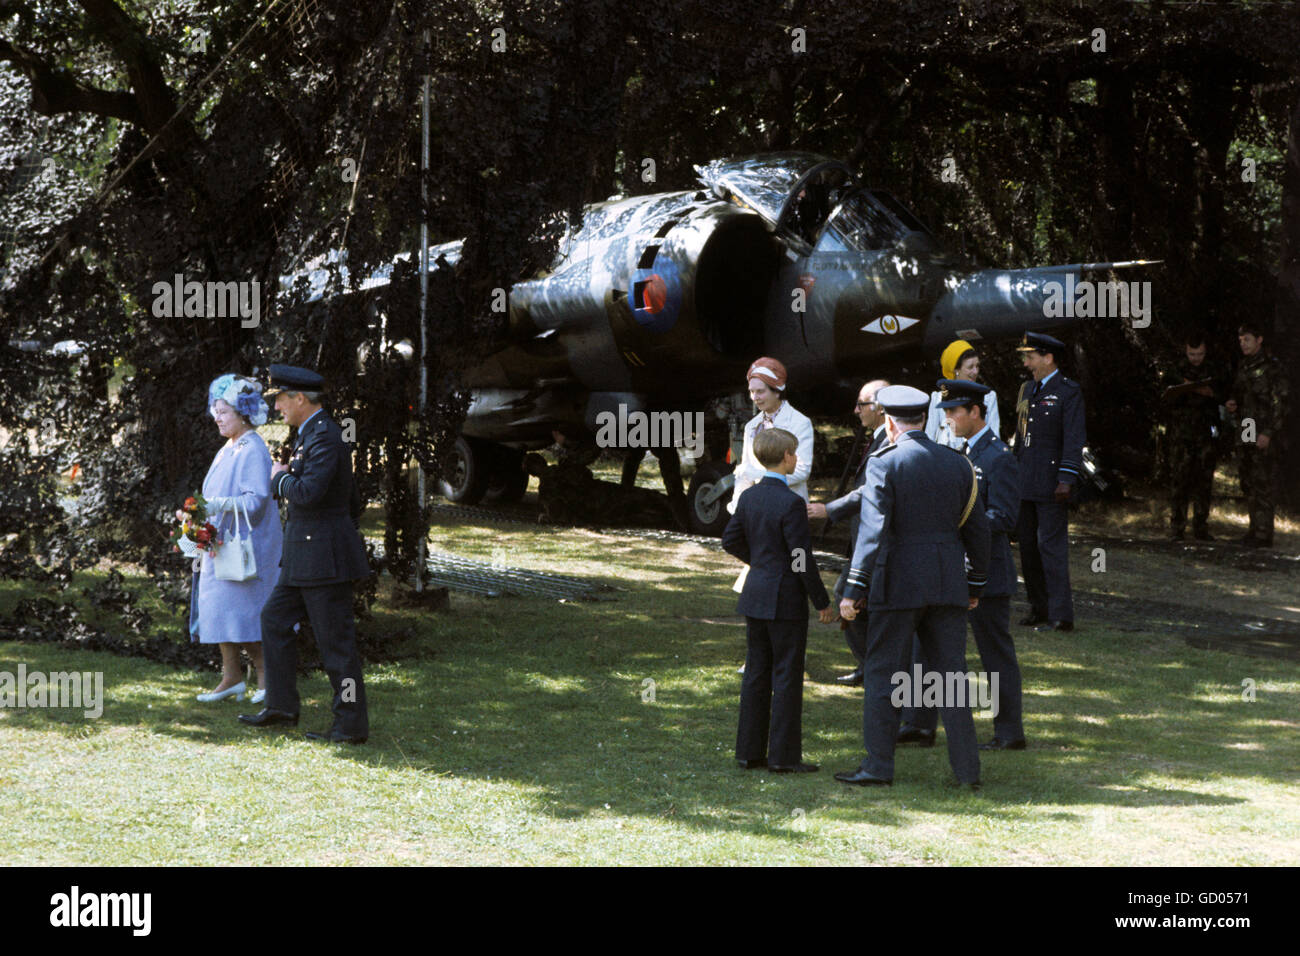 The Queen Mother, Prince Charles, Prince Edward and Princess Alexandra take part in the Queen's Silver Jubilee review of the Royal Air Force at RAF Finningley. Behind is one of the RAF's Harrier jump jets among the trees Stock Photo